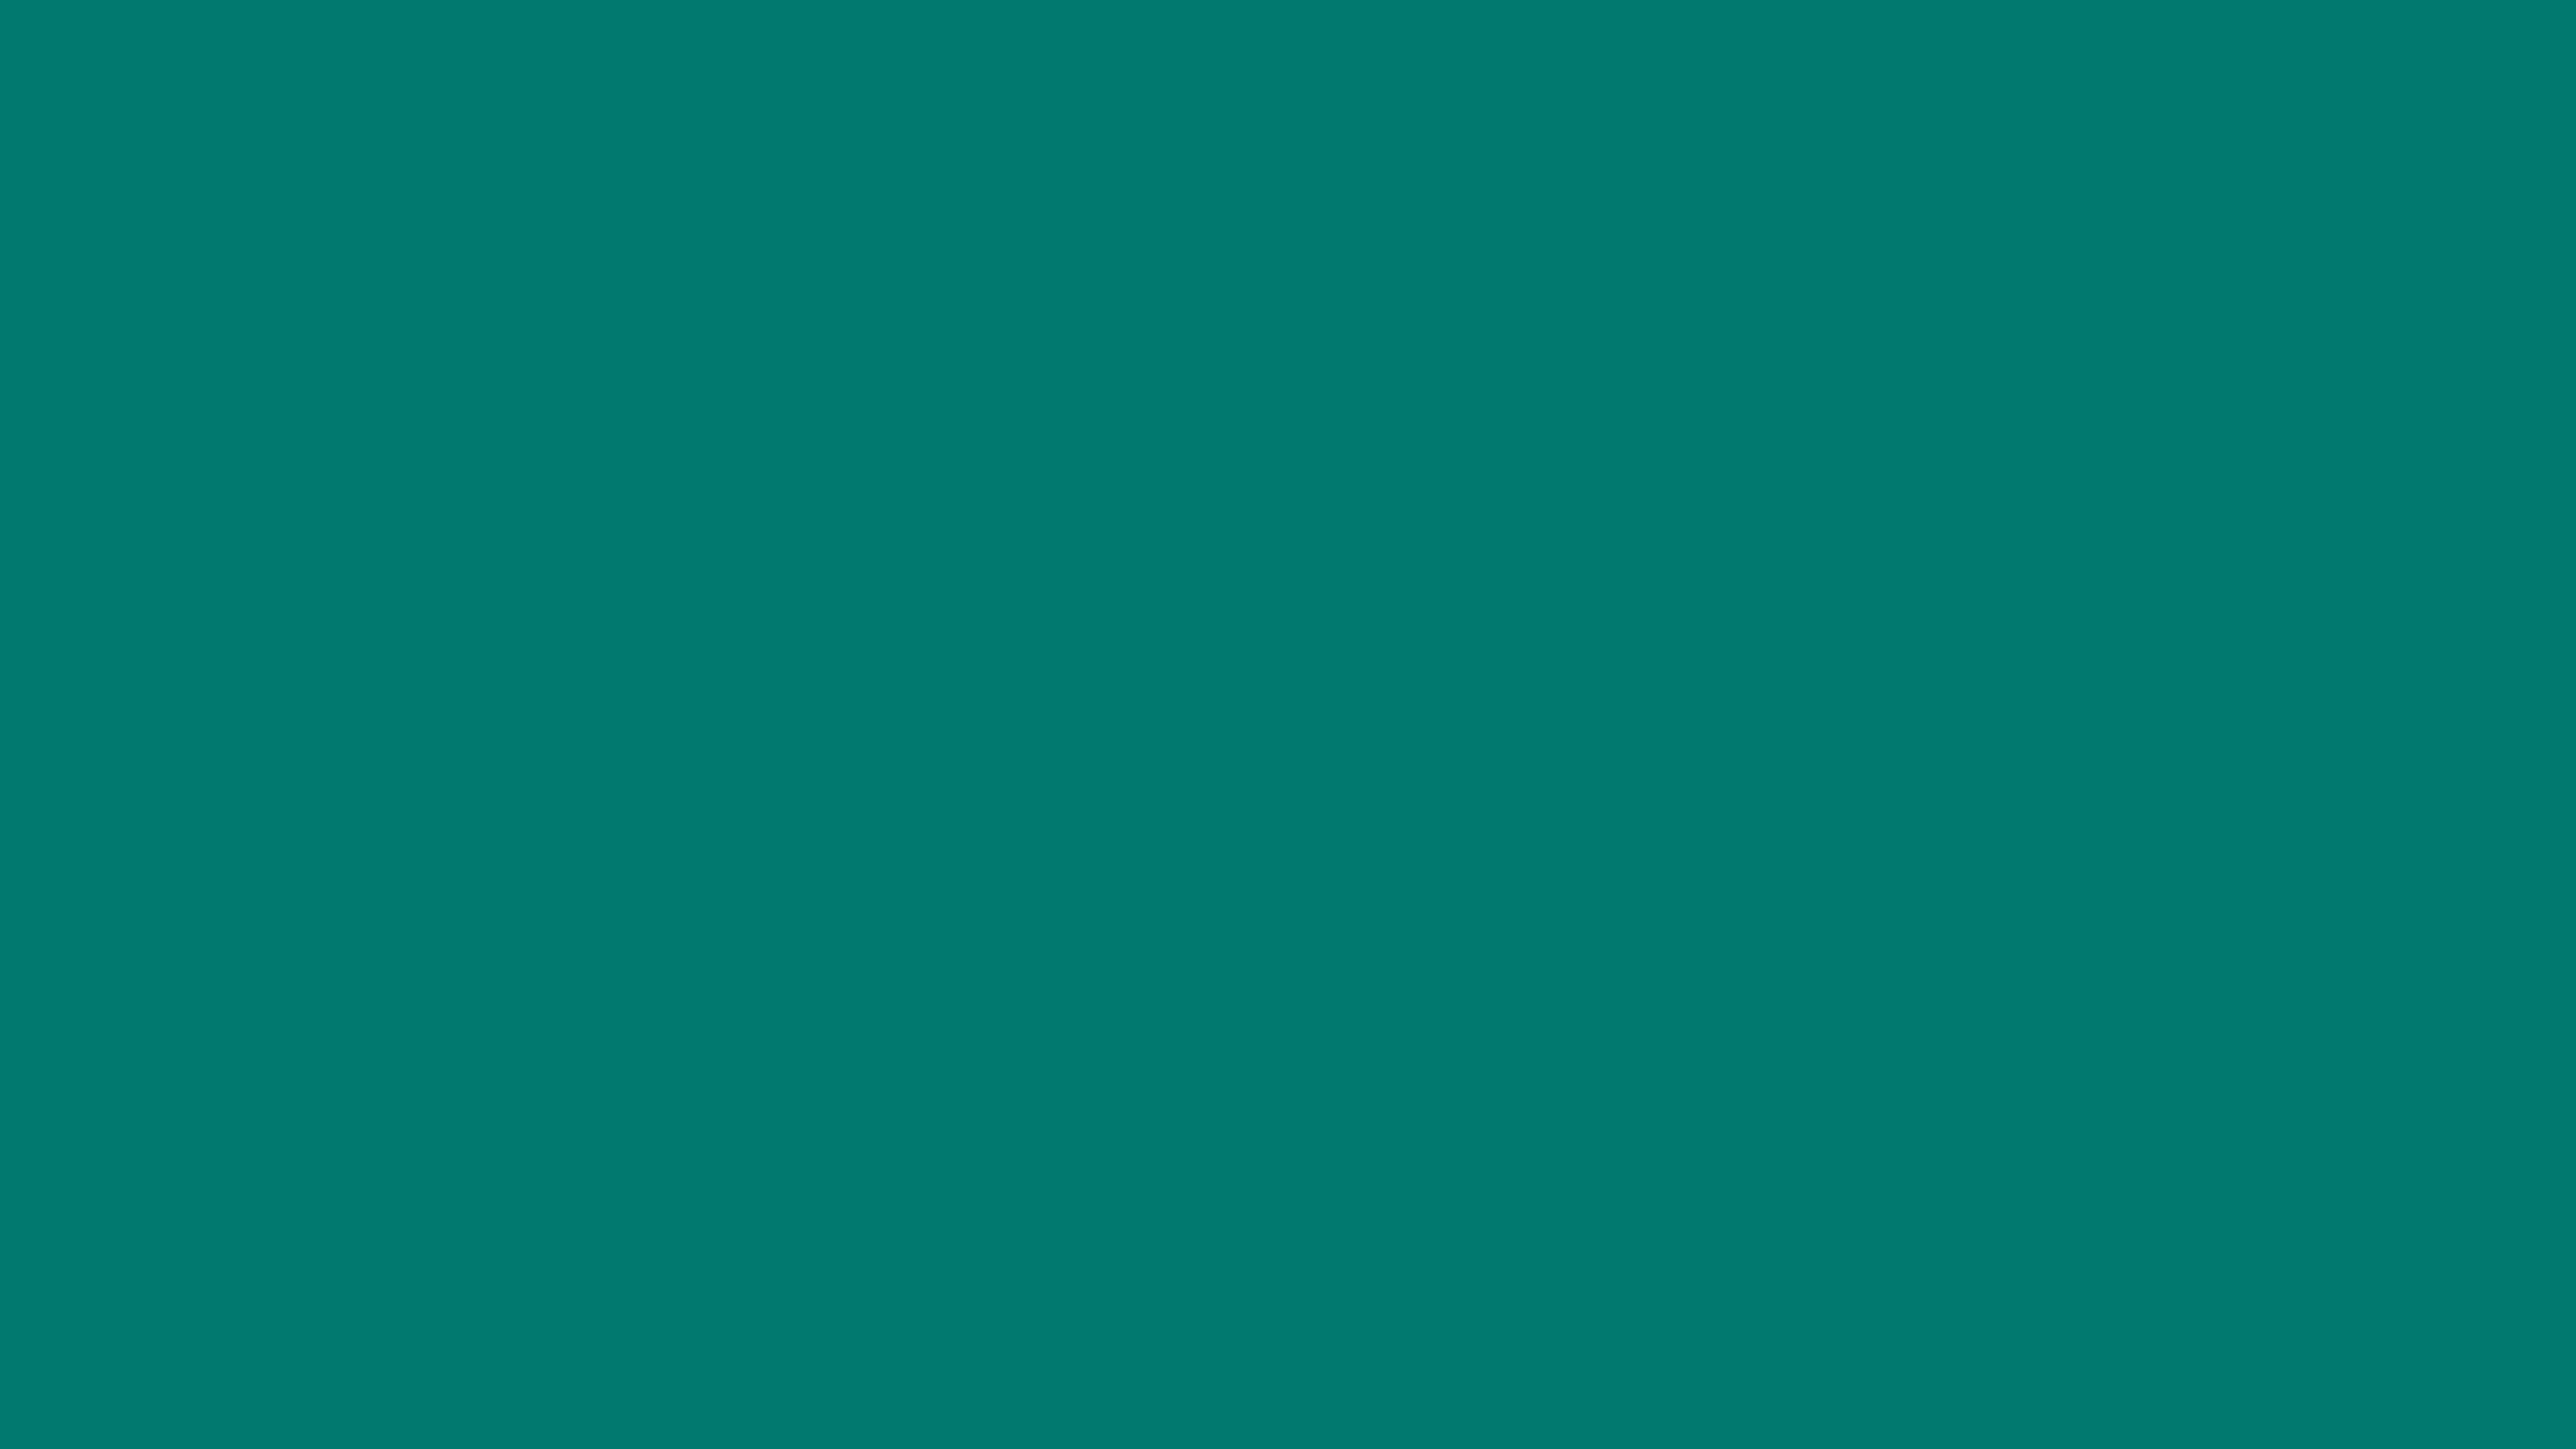 3840x2160 Pine Green Solid Color Background